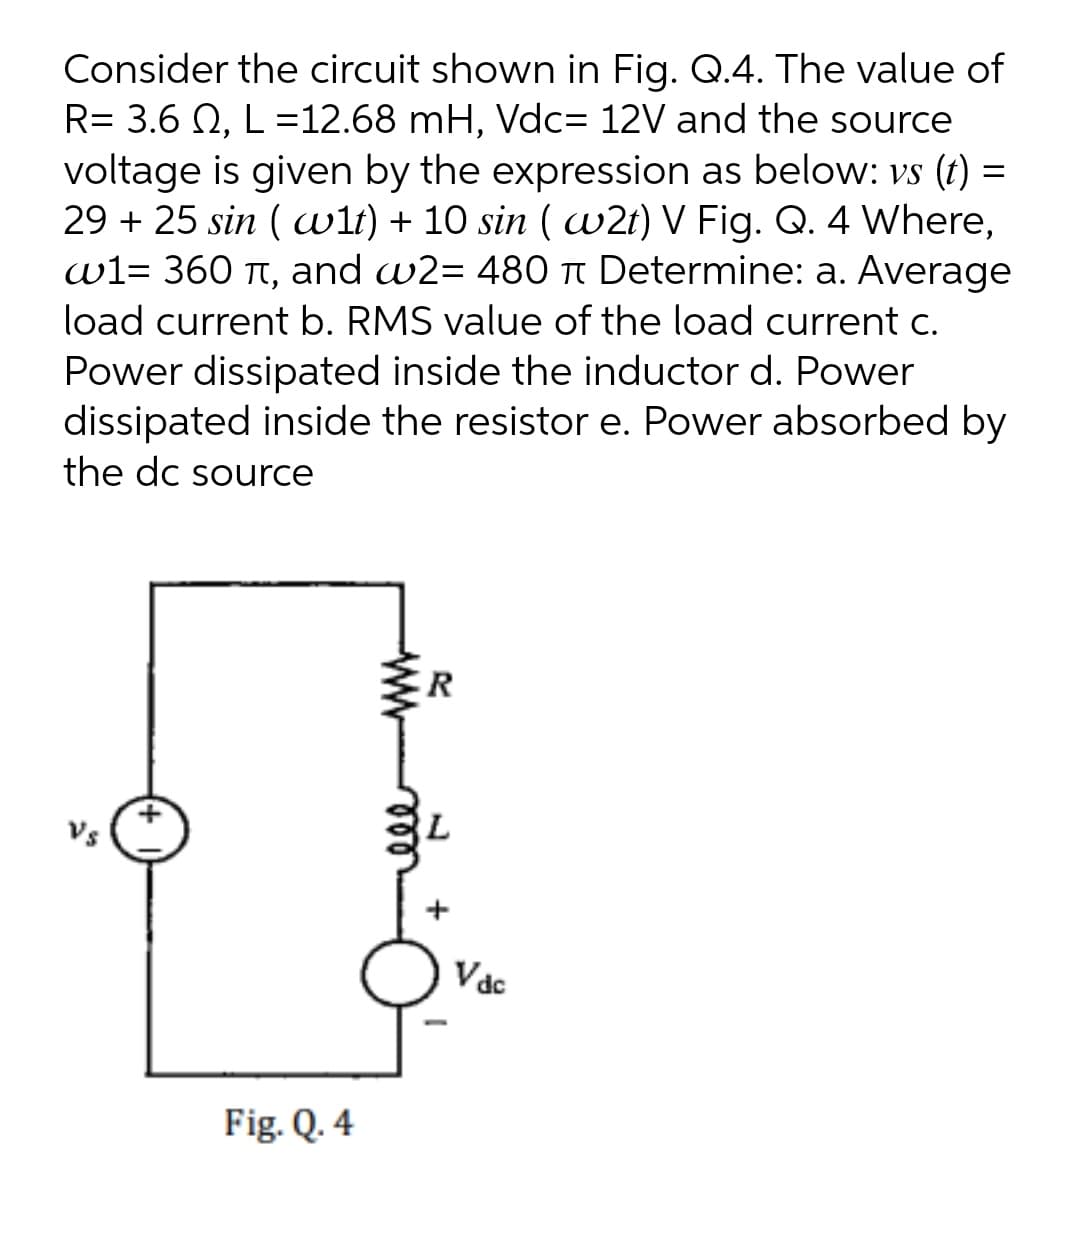 Consider the circuit shown in Fig. Q.4. The value of
R= 3.6 N, L =12.68 mH, Vdc= 12V and the source
voltage is given by the expression as below: vs (t) =
29 + 25 sin ( wit) + 10 sin ( w2t) V Fig. Q. 4 Where,
w1= 360 t, and w2= 480 t Determine: a. Average
load current b. RMS value of the load current c.
Power dissipated inside the inductor d. Power
dissipated inside the resistor e. Power absorbed by
the dc source
Vs
Vác
Fig. Q. 4
